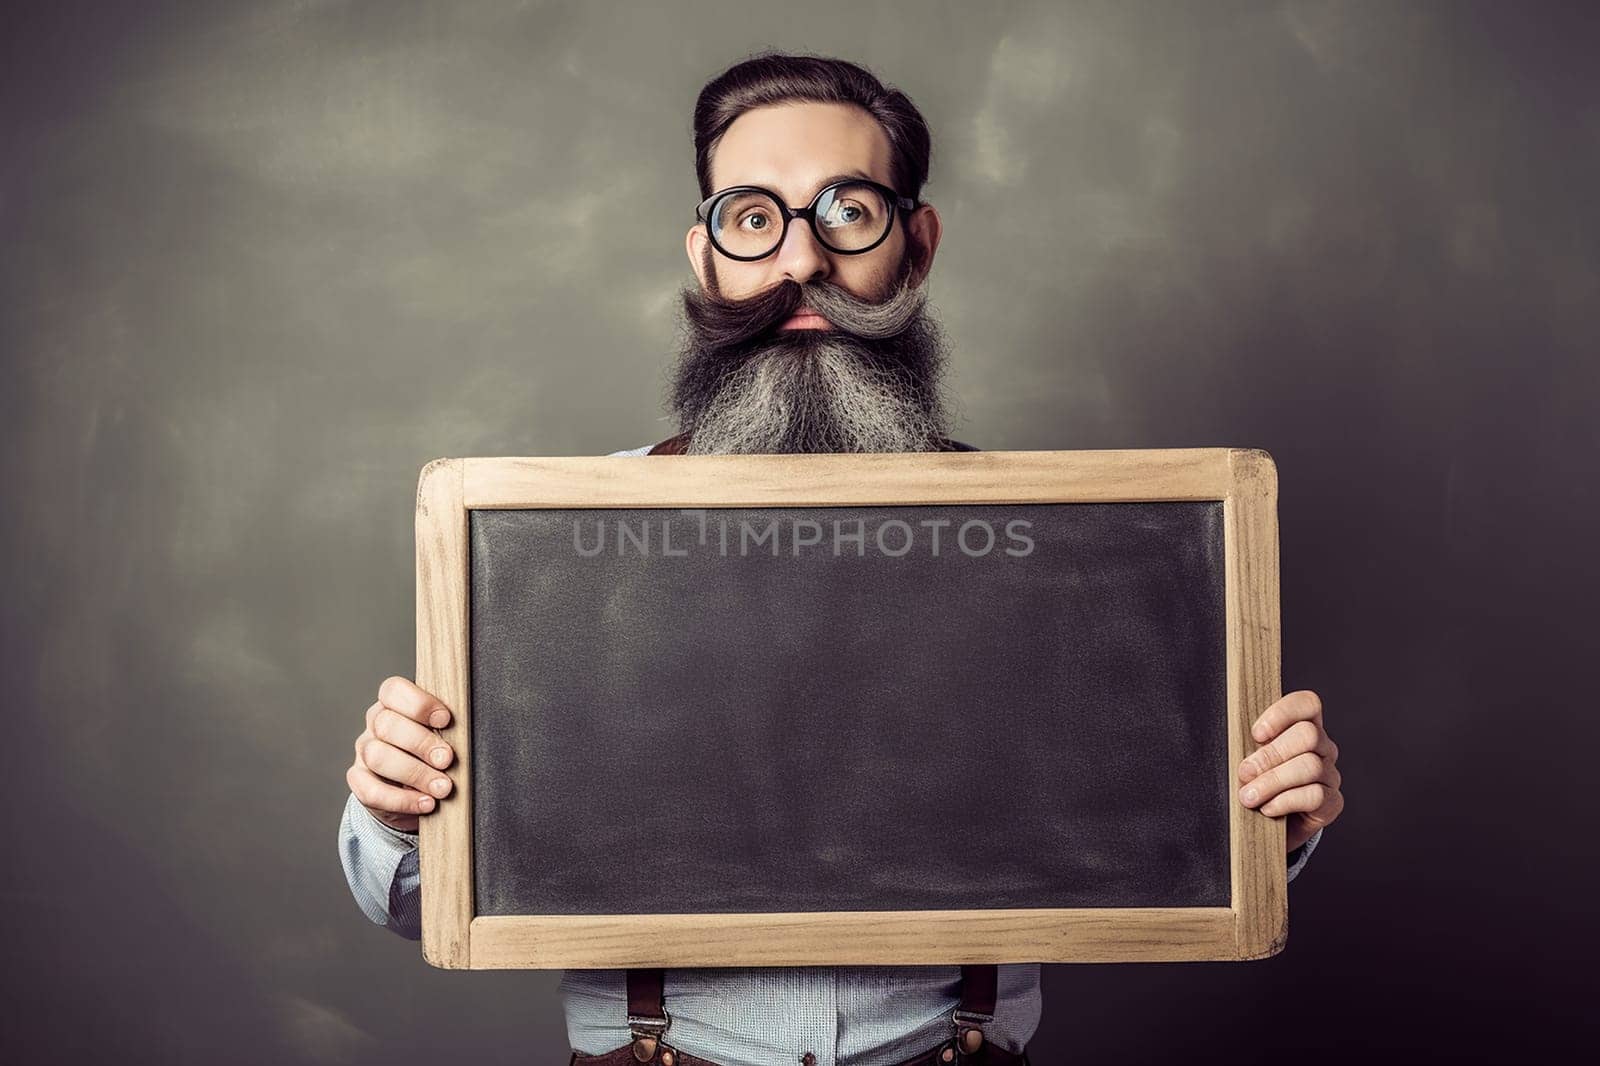 Man with a large spiral beard holding a blank chalkboard